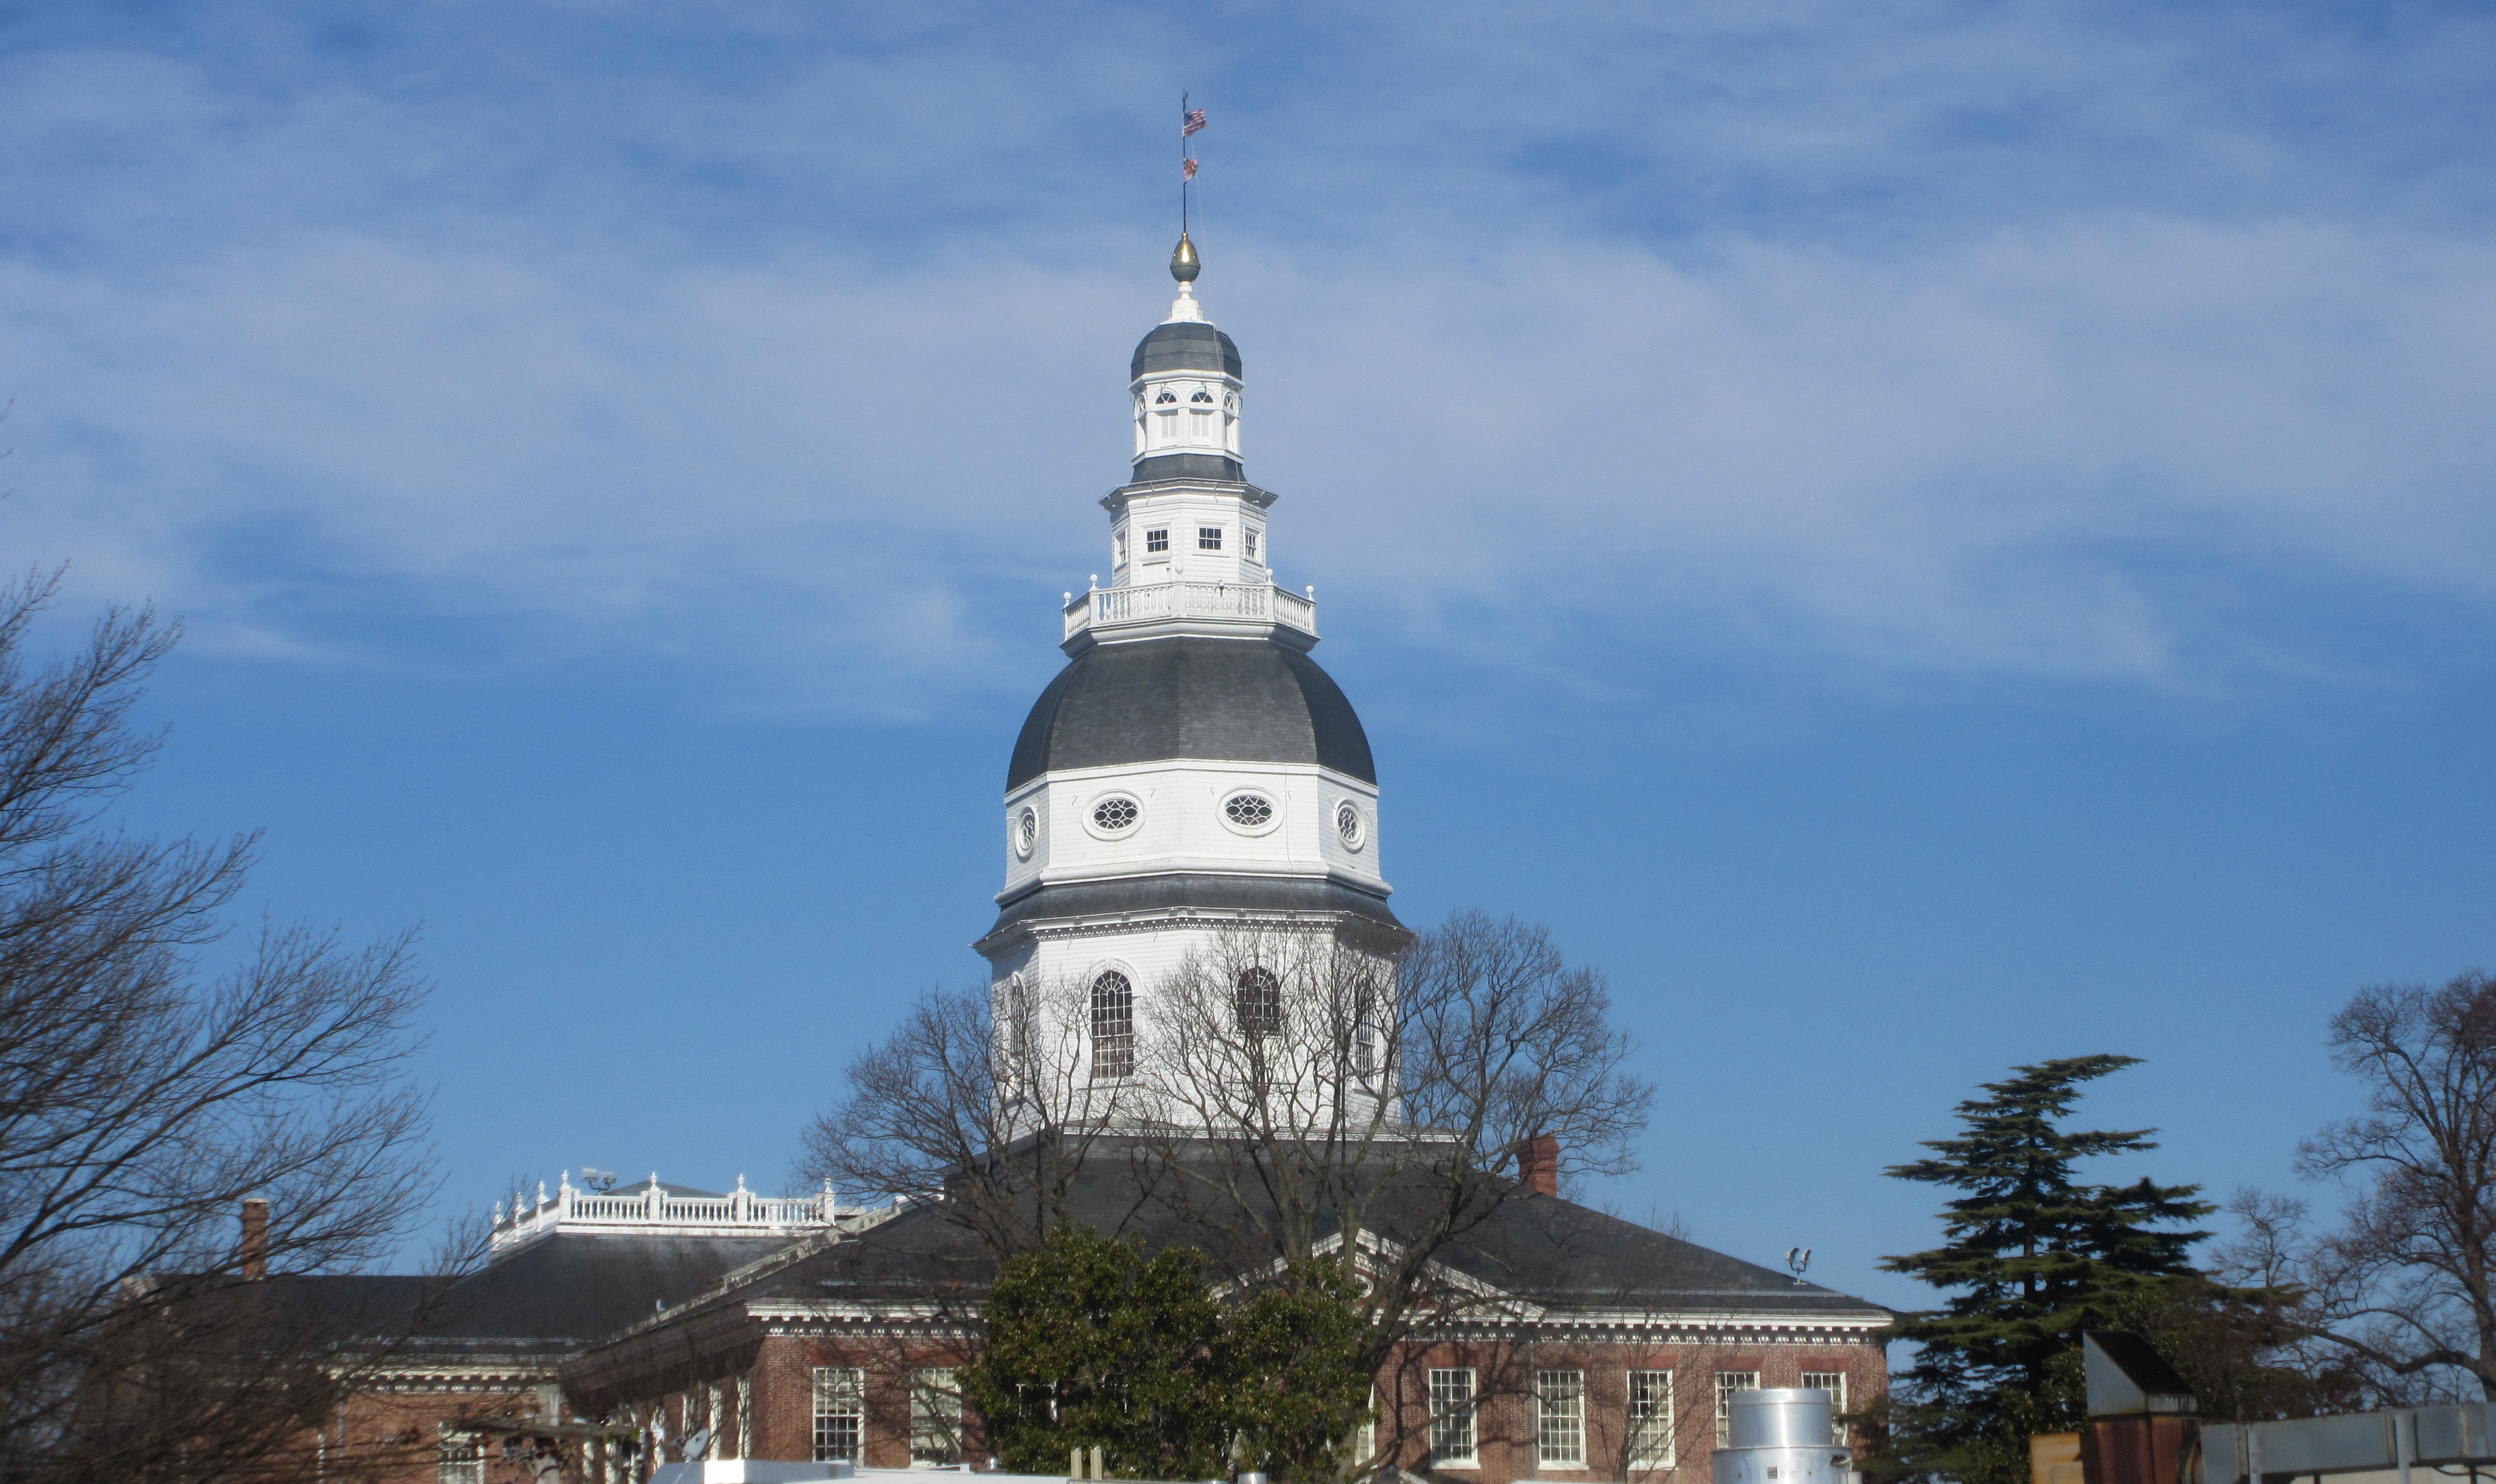 The State House meal ticket and other General Assembly factoids